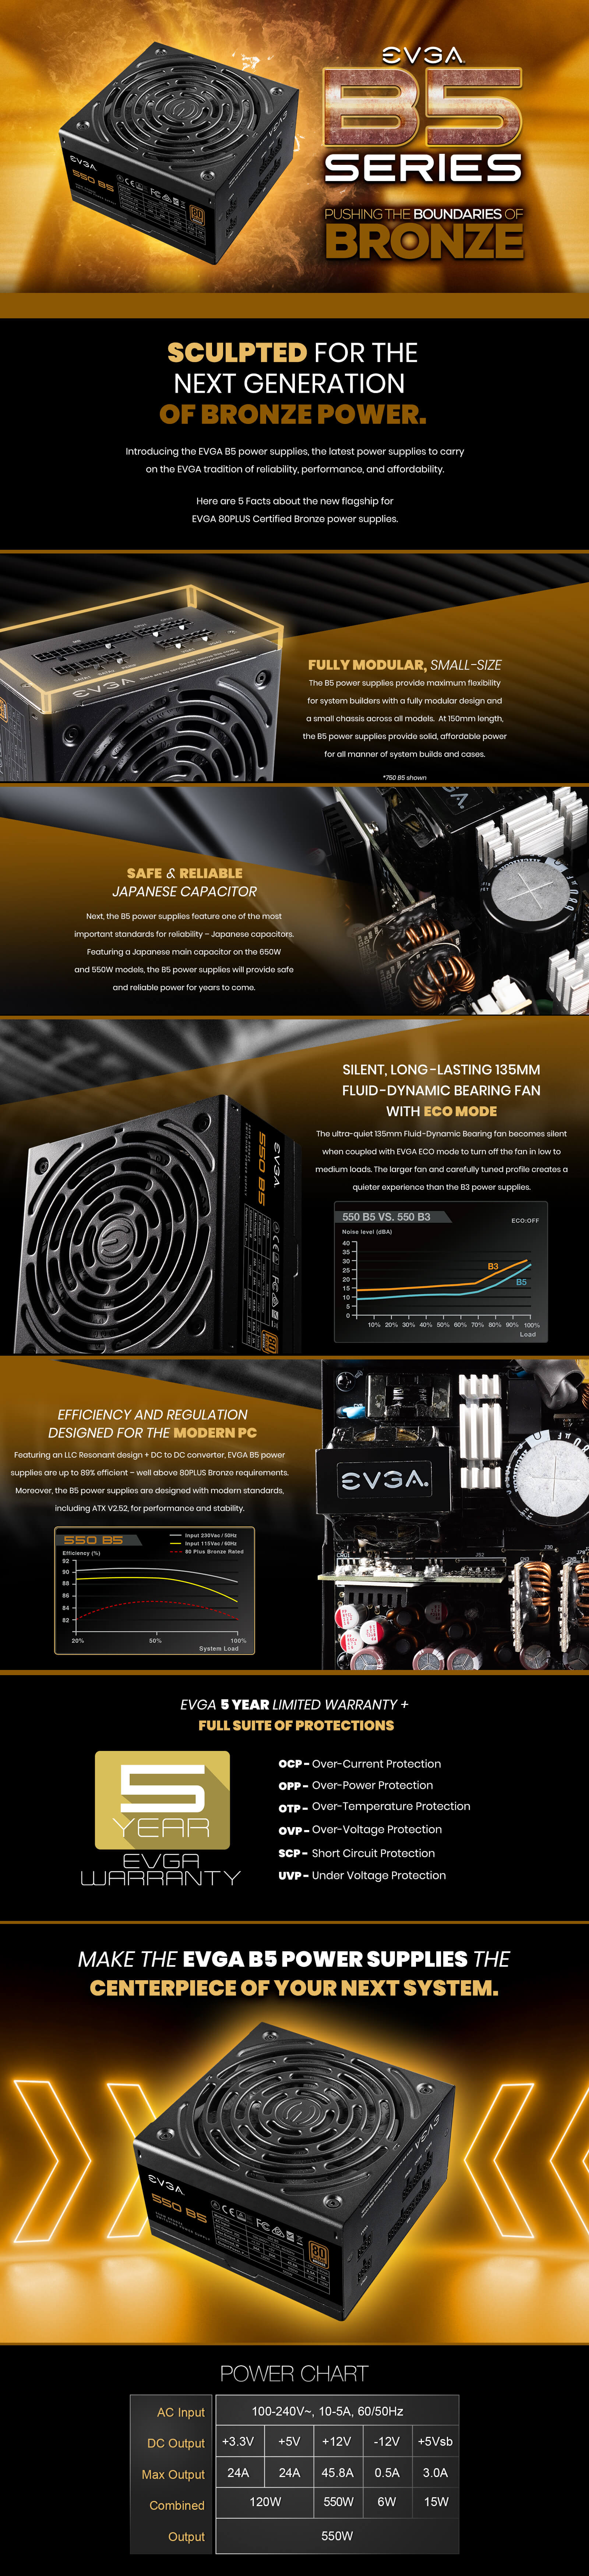 View detailed feature information for EVGA 550 B5, 80 Plus BRONZE 550W, Fully Modular, EVGA ECO Mode, 5 Year Warranty, Compact 150mm Size, Power Supply 220-B5-0550-V1